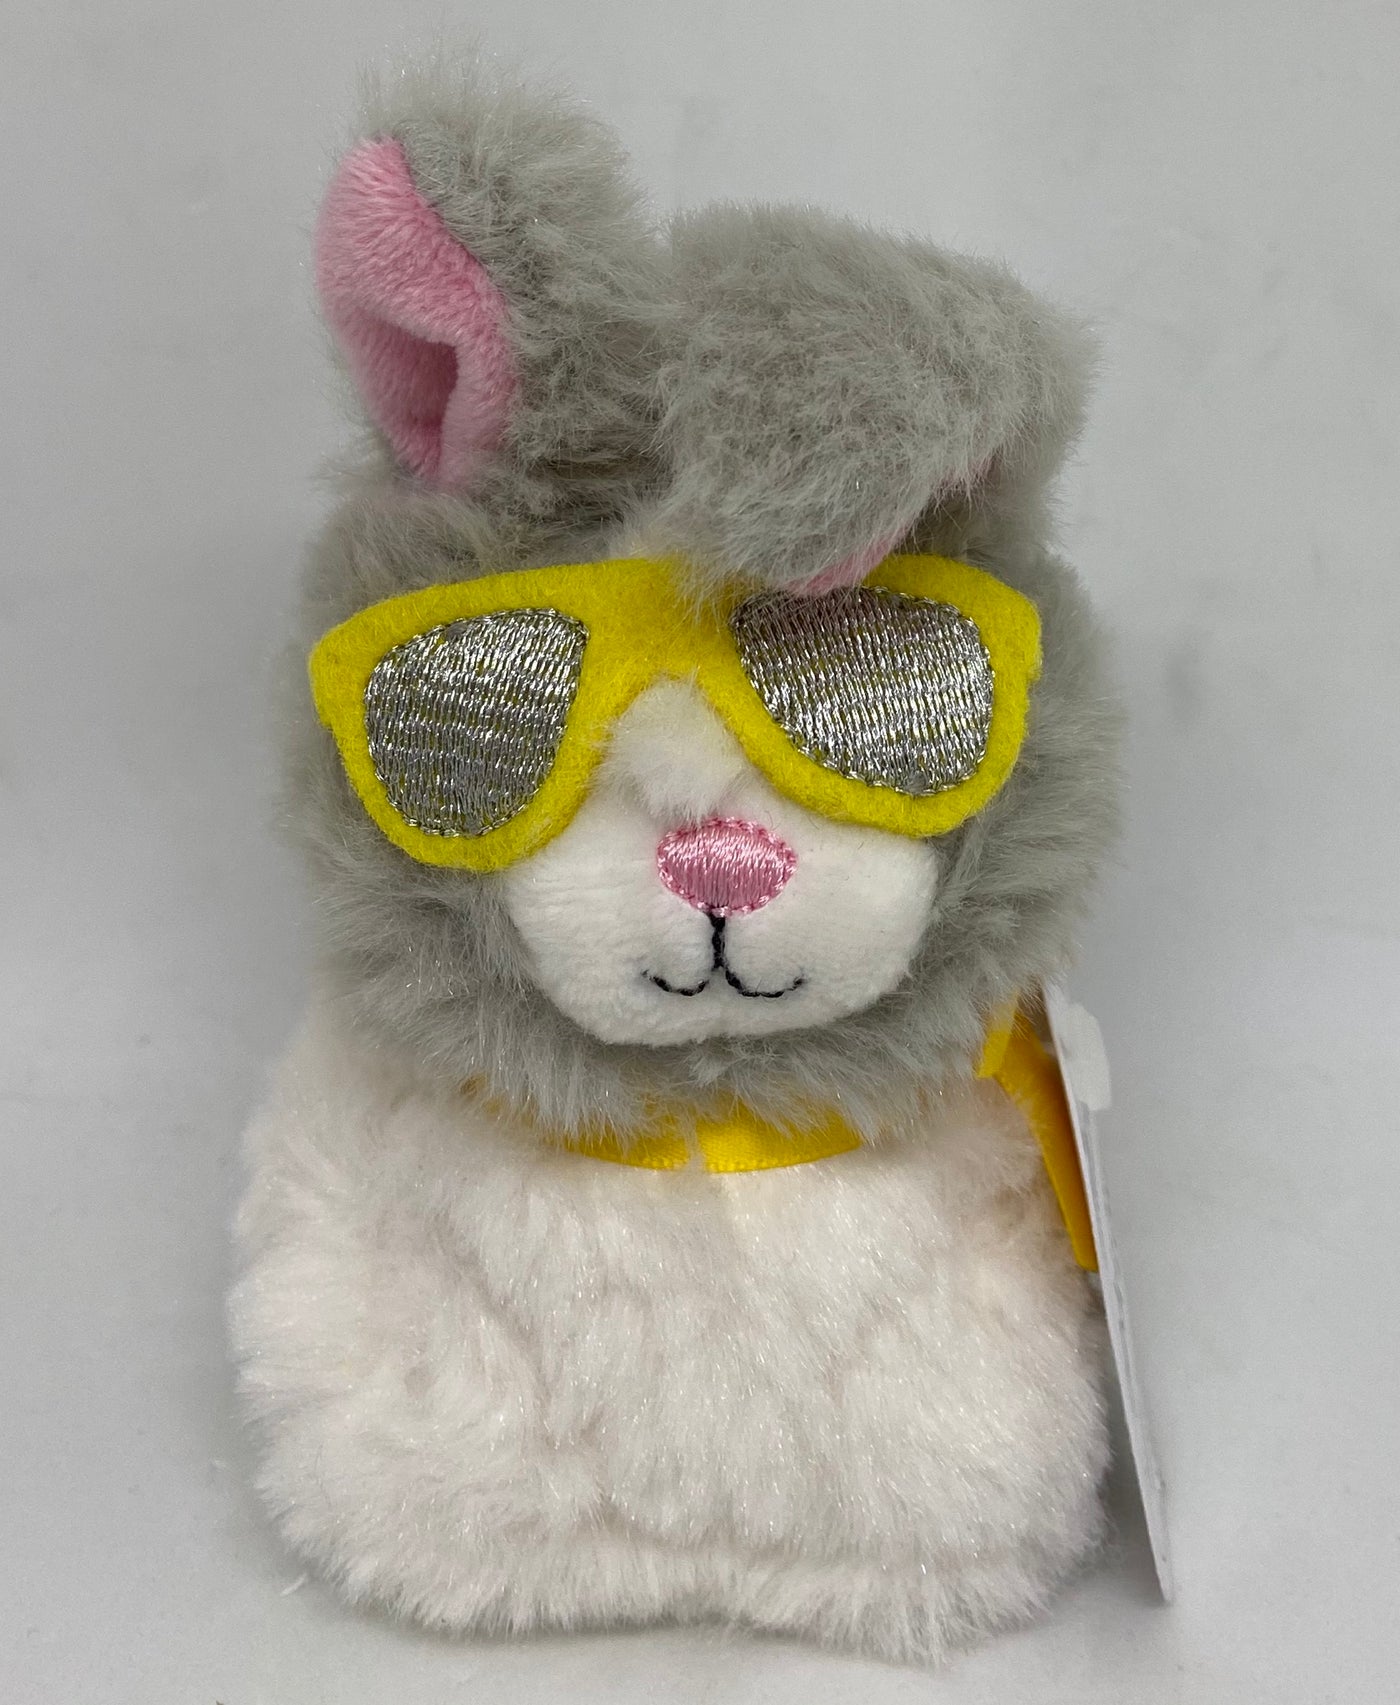 Hallmark Easter Bunny with Sunglasses Zip A Long Plush New with Tag